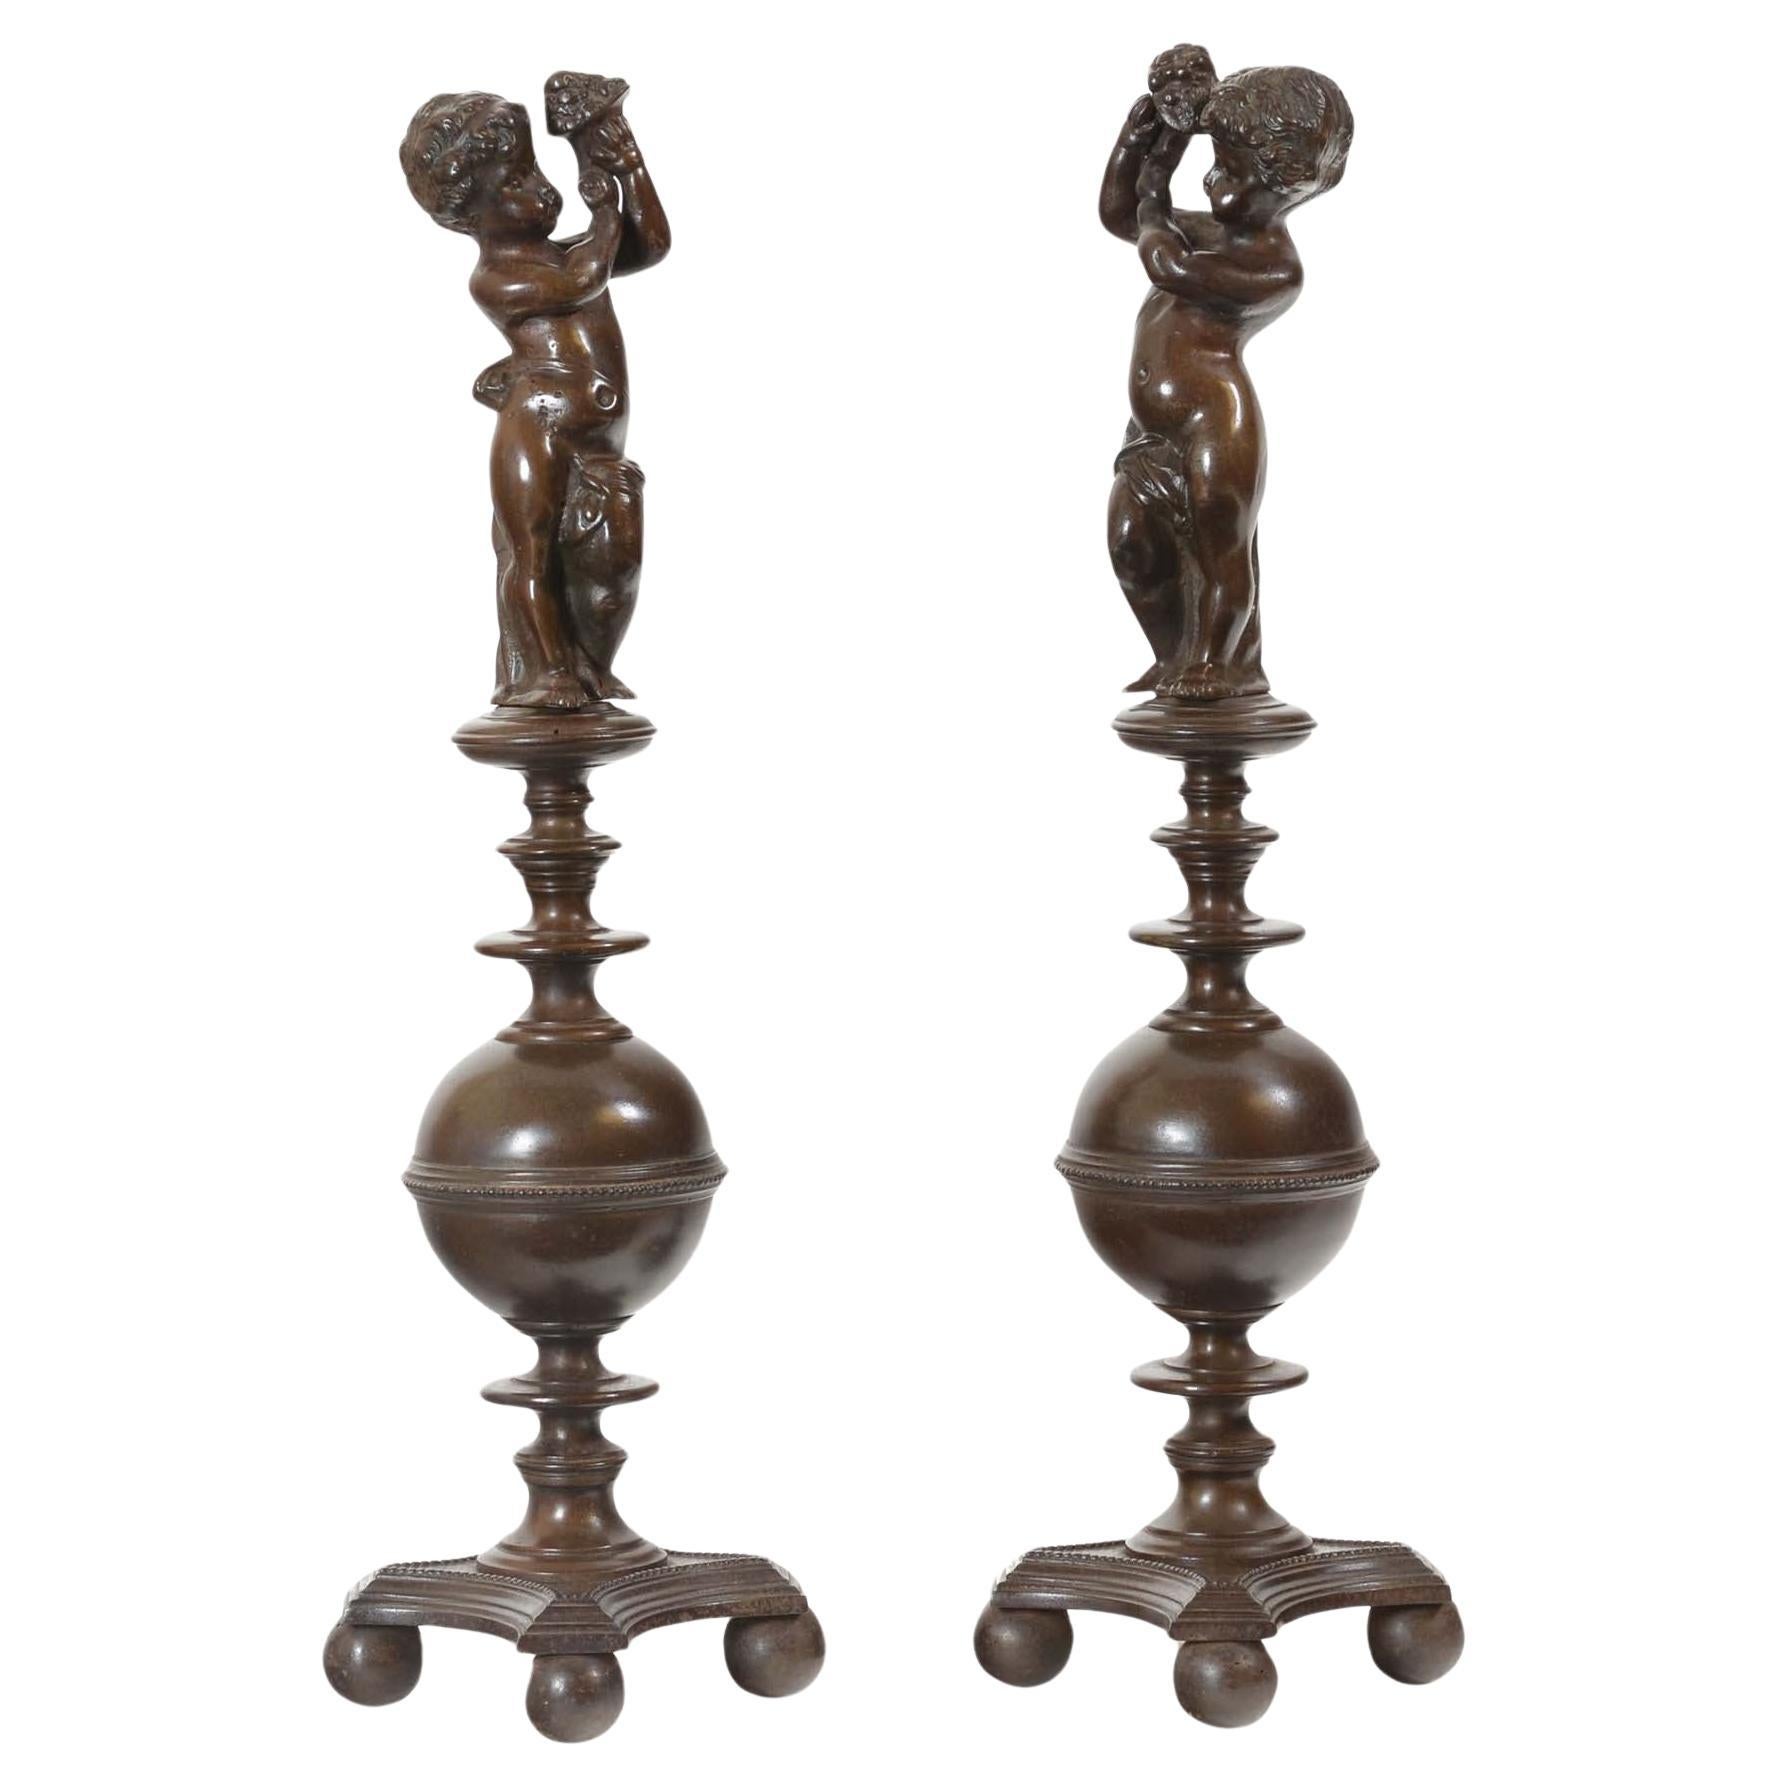 Pair of bronzed cast iron Italian Renaissance style fire andirons For Sale